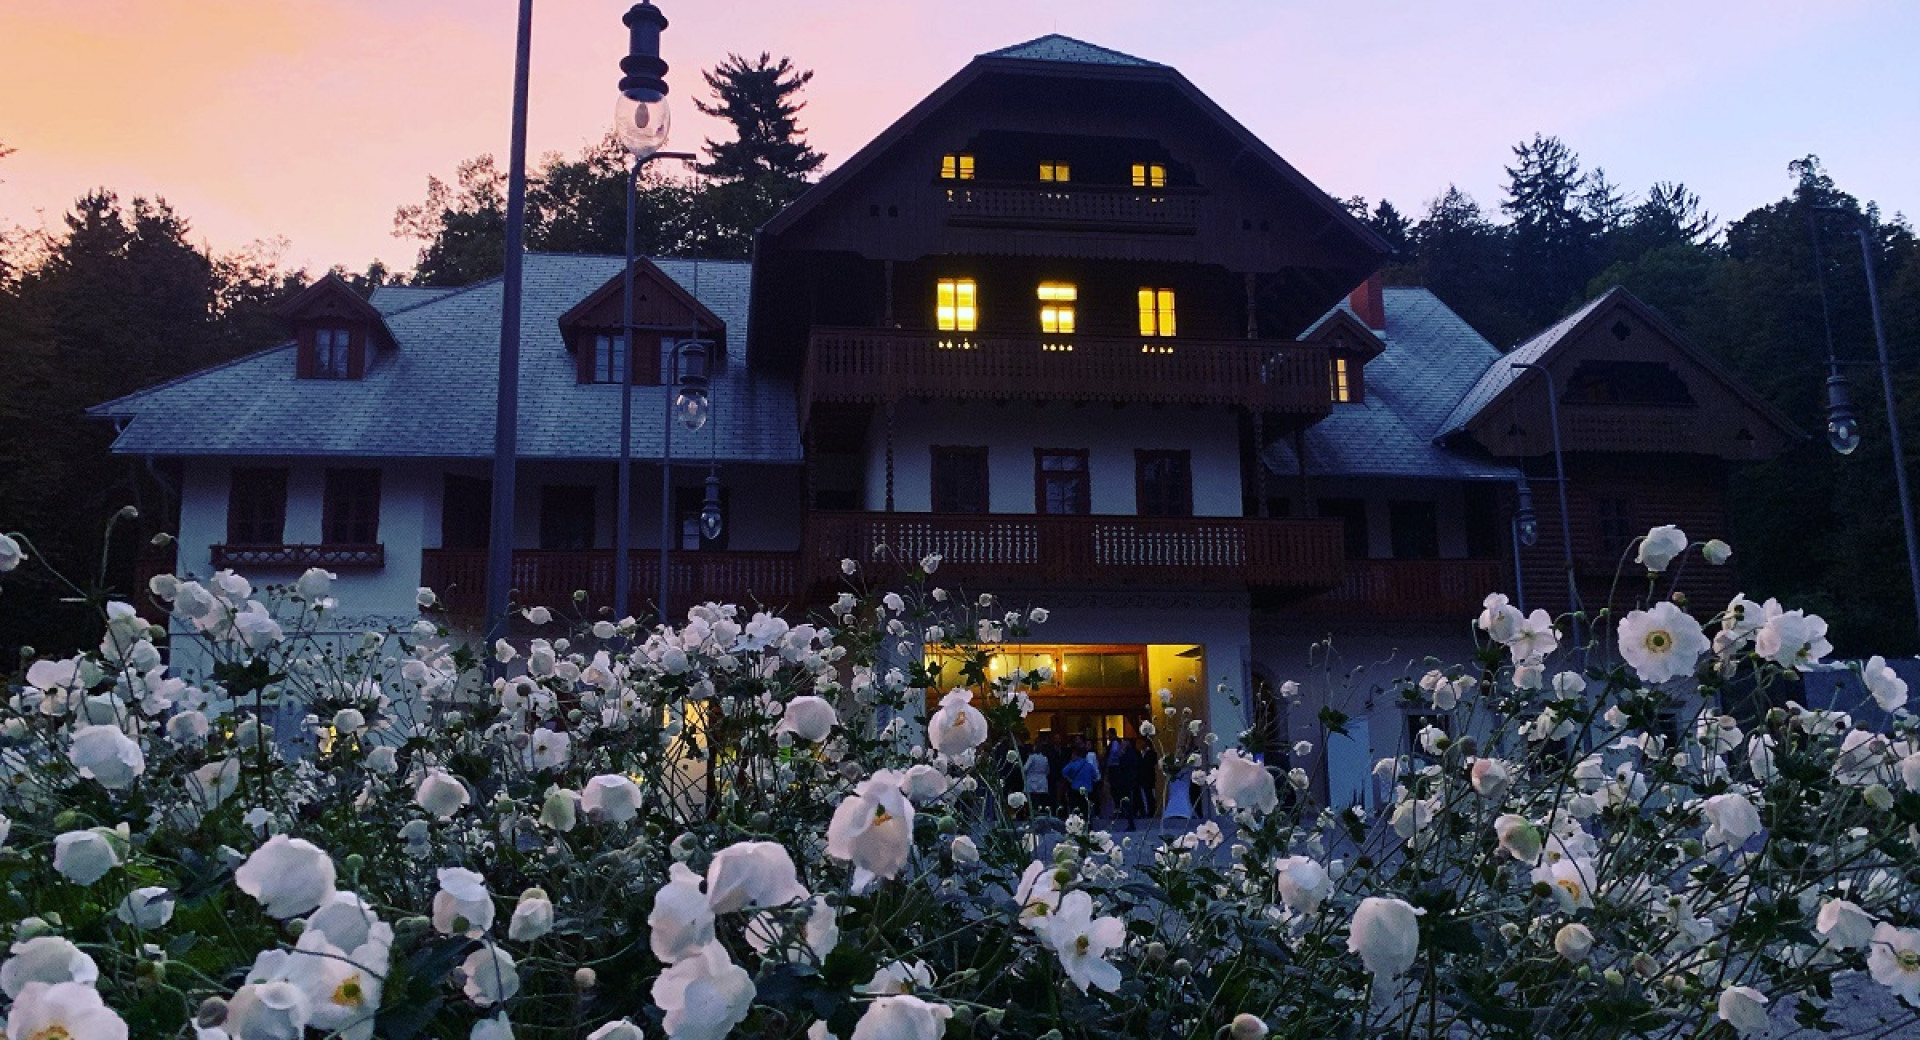 The front view of a large building, partly made of wood. Bushes of white flowers in front of it. Darkness. The windows on the building are illuminated.